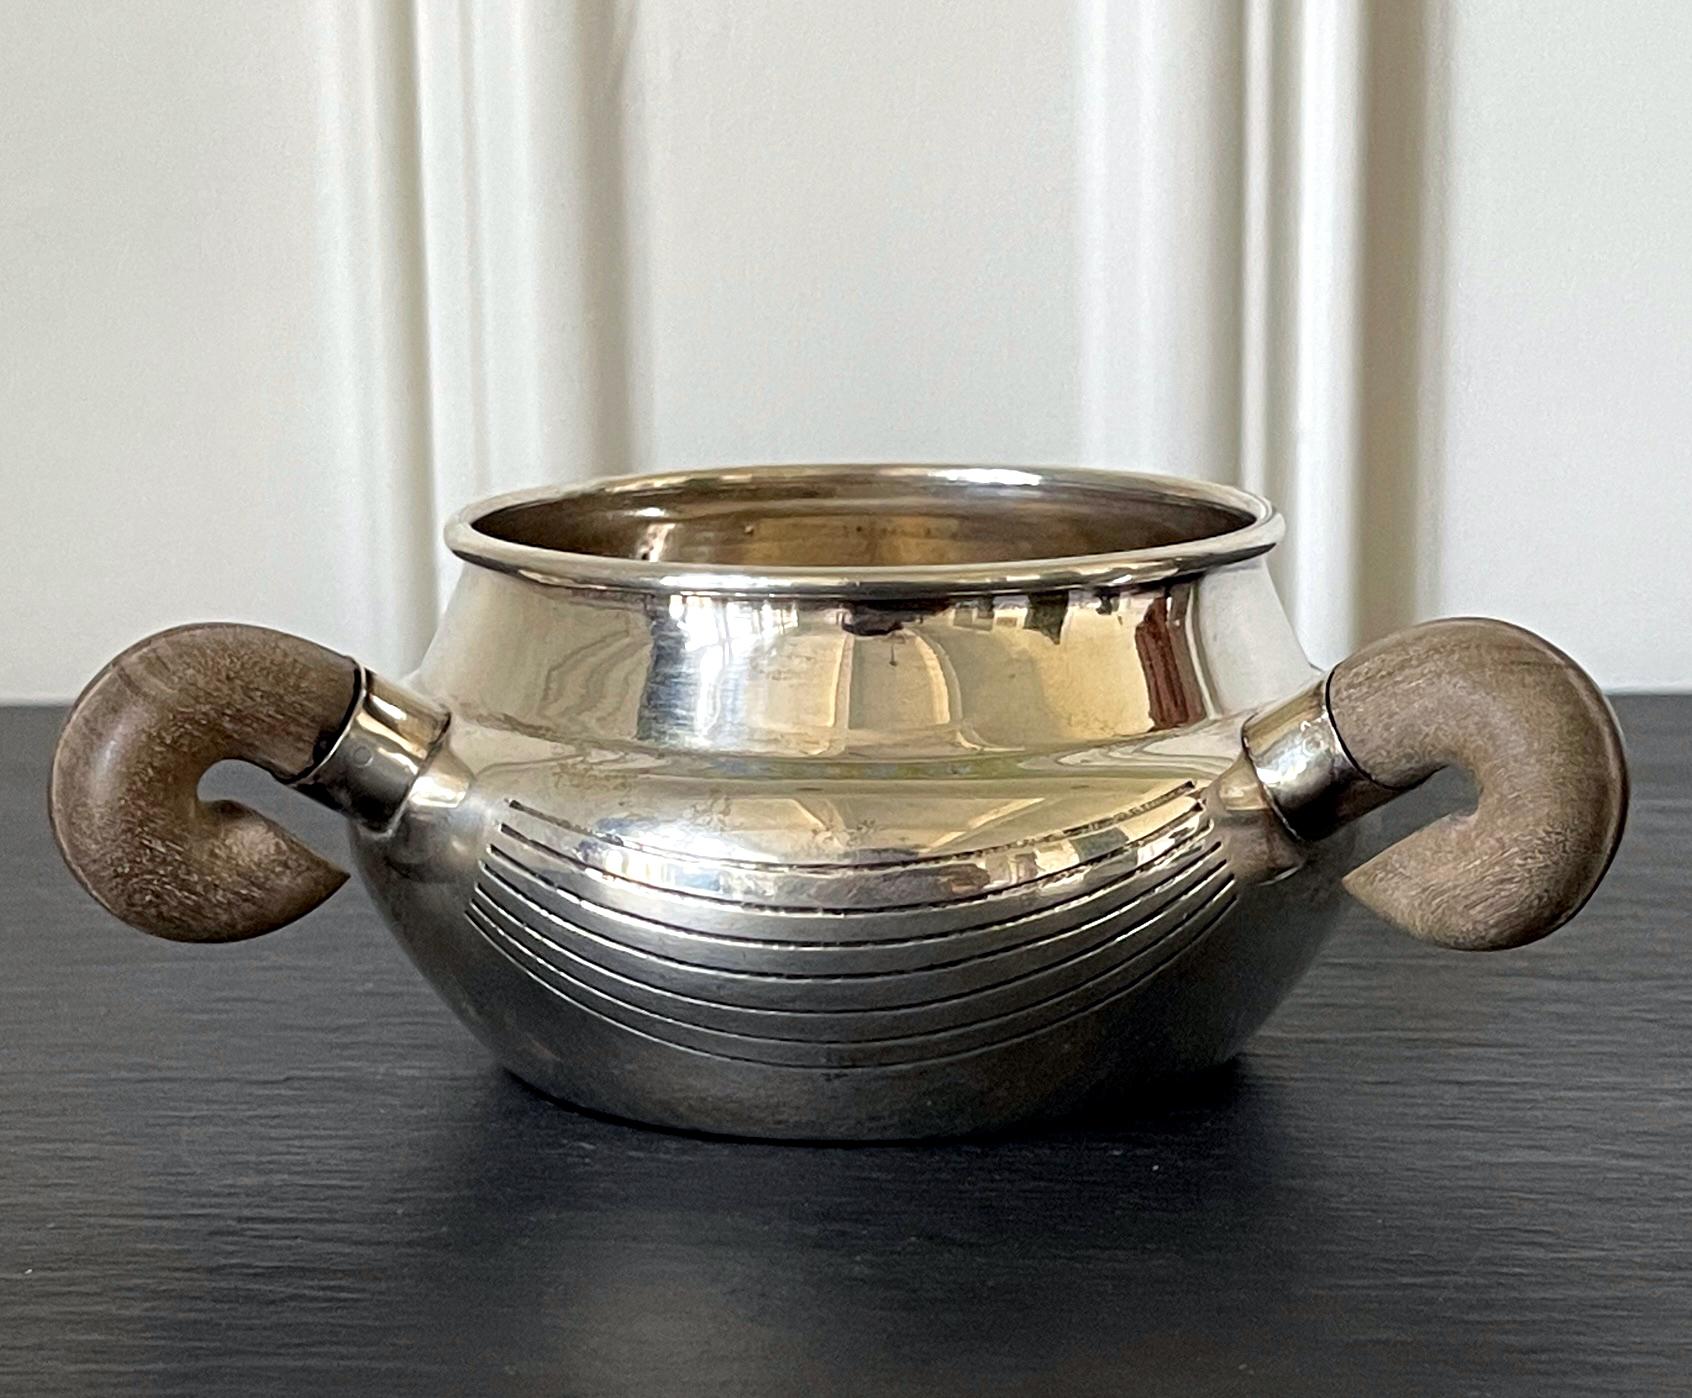 A modernist sterling silver bowl with three exotic wood handles circa 1951-1956. The bowl was designed and crafted by William Spratling in Taxco Mexico. Its bulbous form is accentuated with three curled wood handles. The surface was decorated with